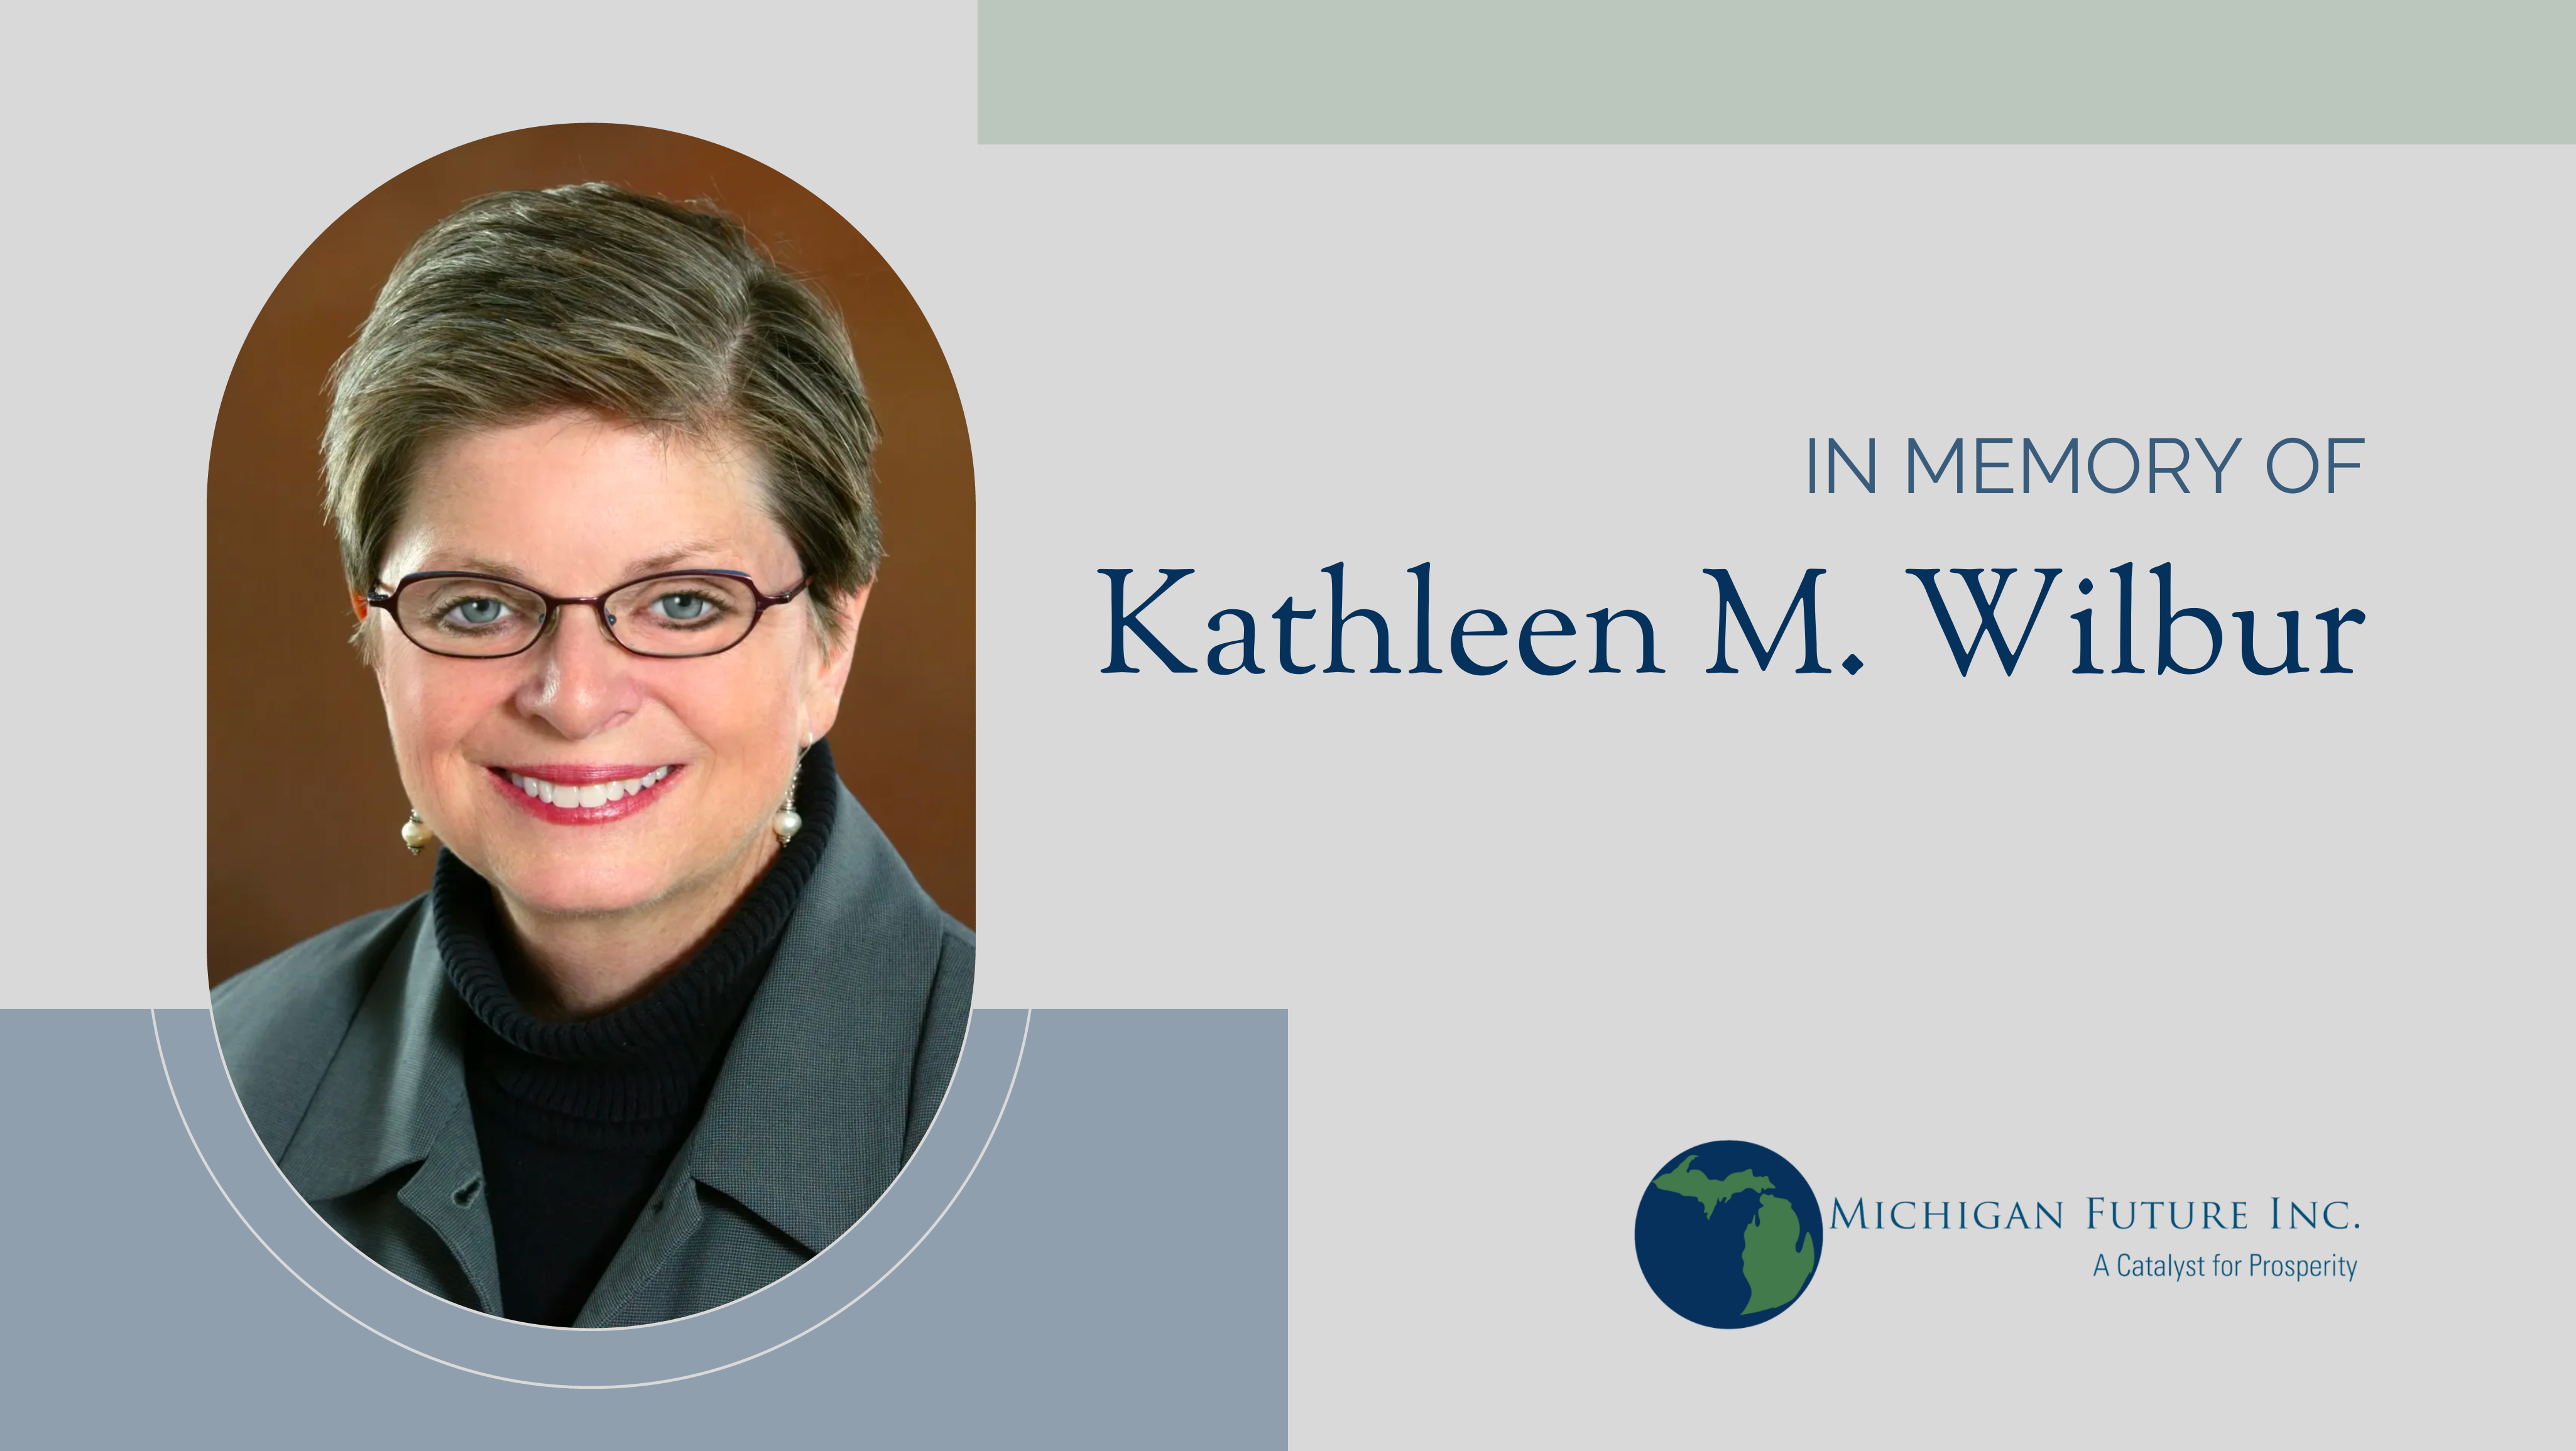 Statement On The Passing Of Kathleen M. Wilbur